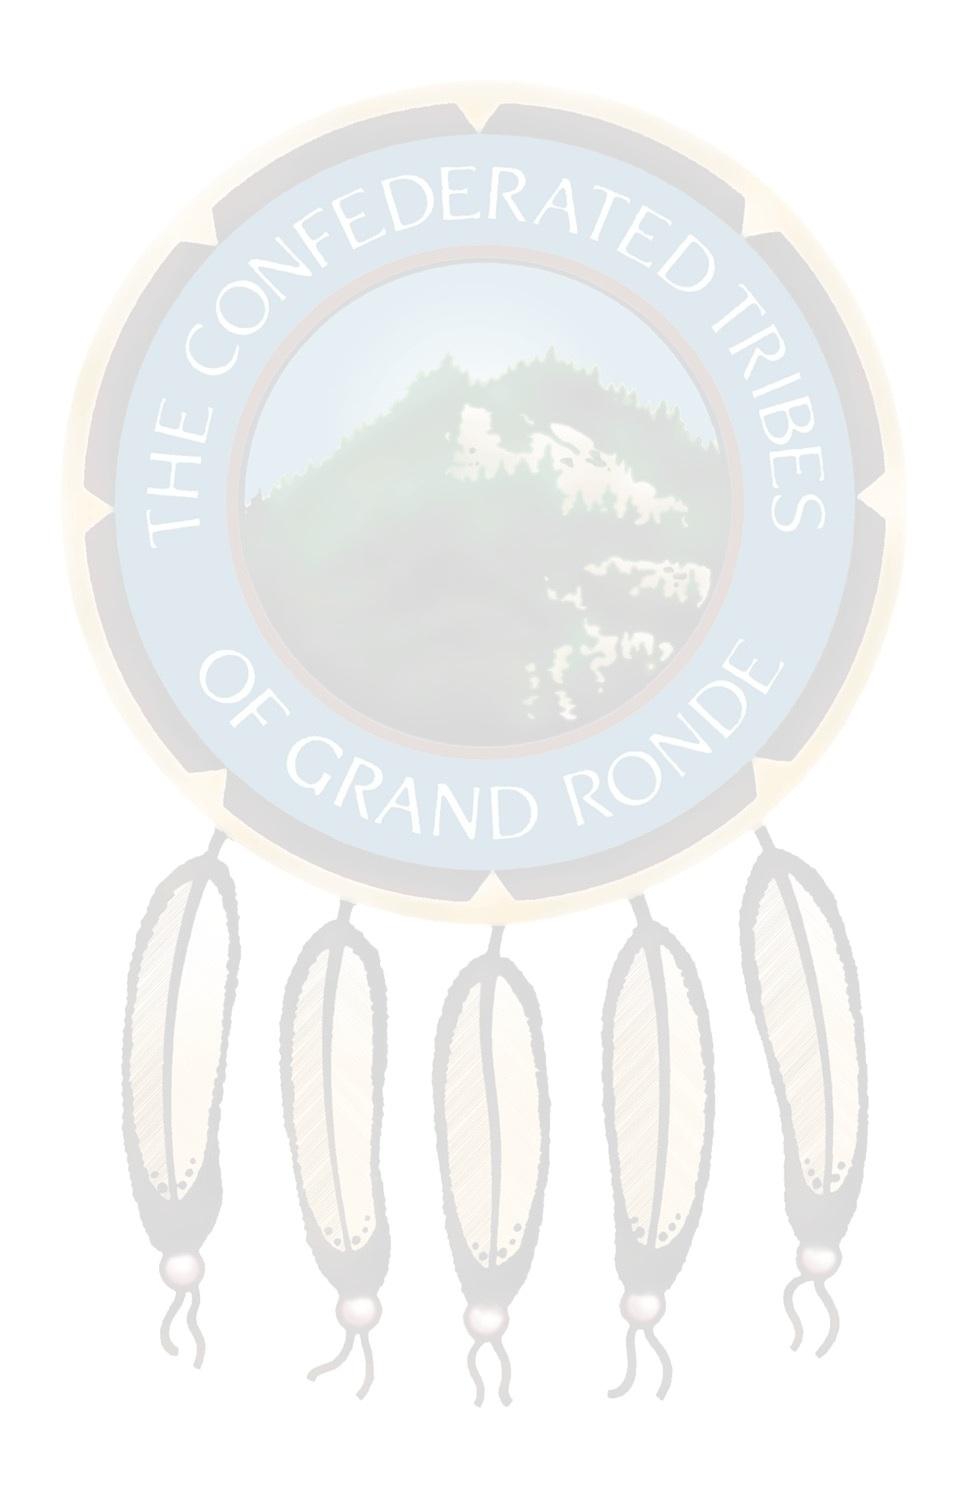 GRAND RONDE GAMING COMMISSION Gaming License Last Name First Name Middle Name Aliases ( Please list name and indicate whether name is nickname, maiden name, other name change(s) - whether legal or